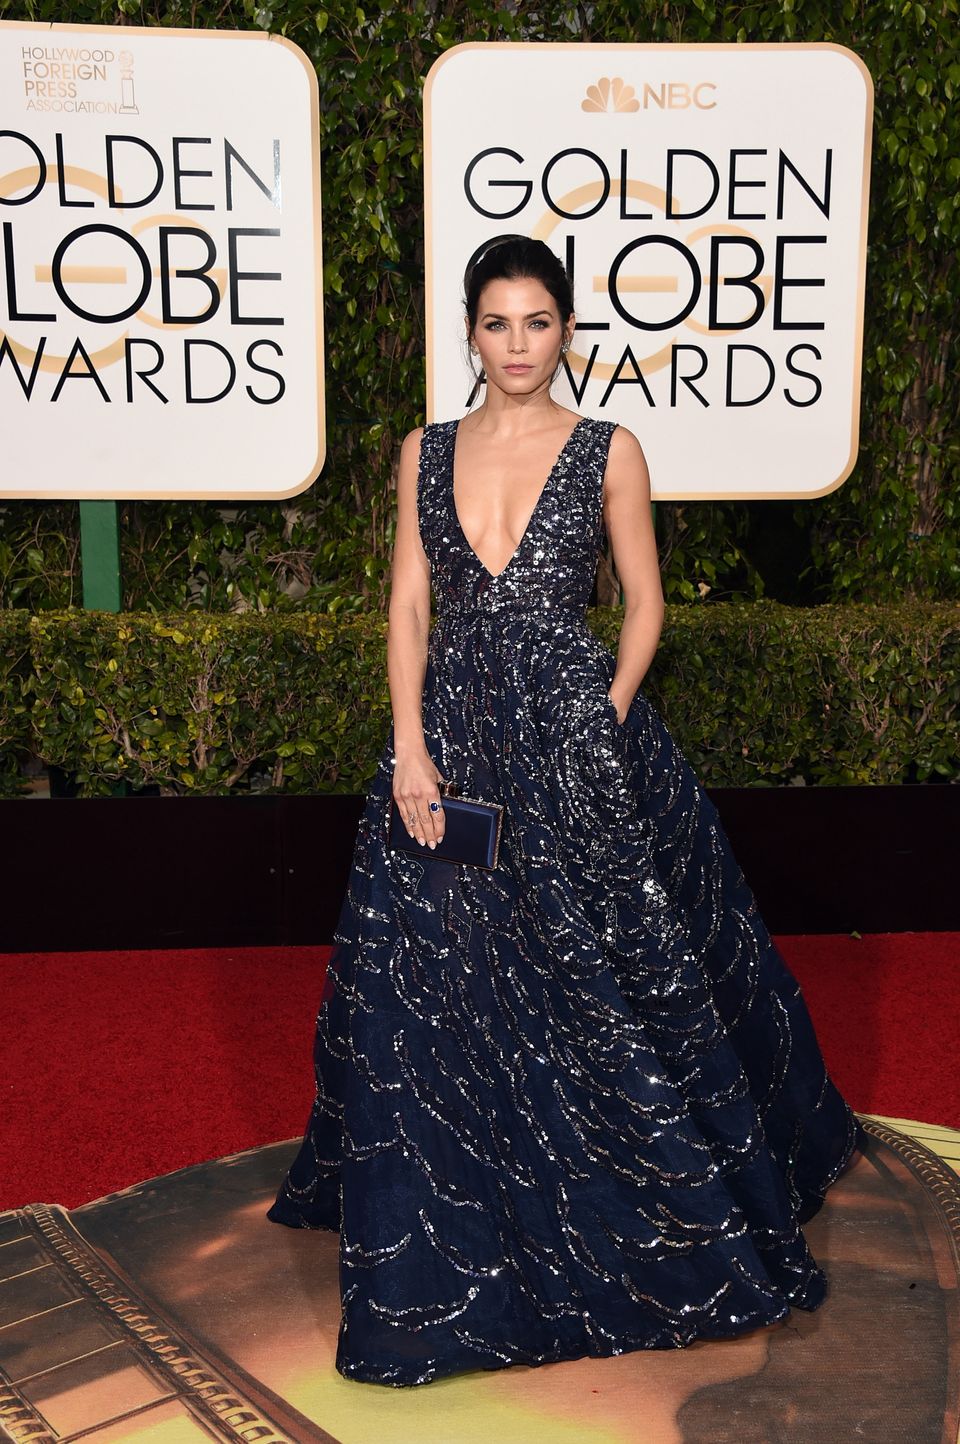 The Golden Globes BestDressed List Is Absolutely JawDropping